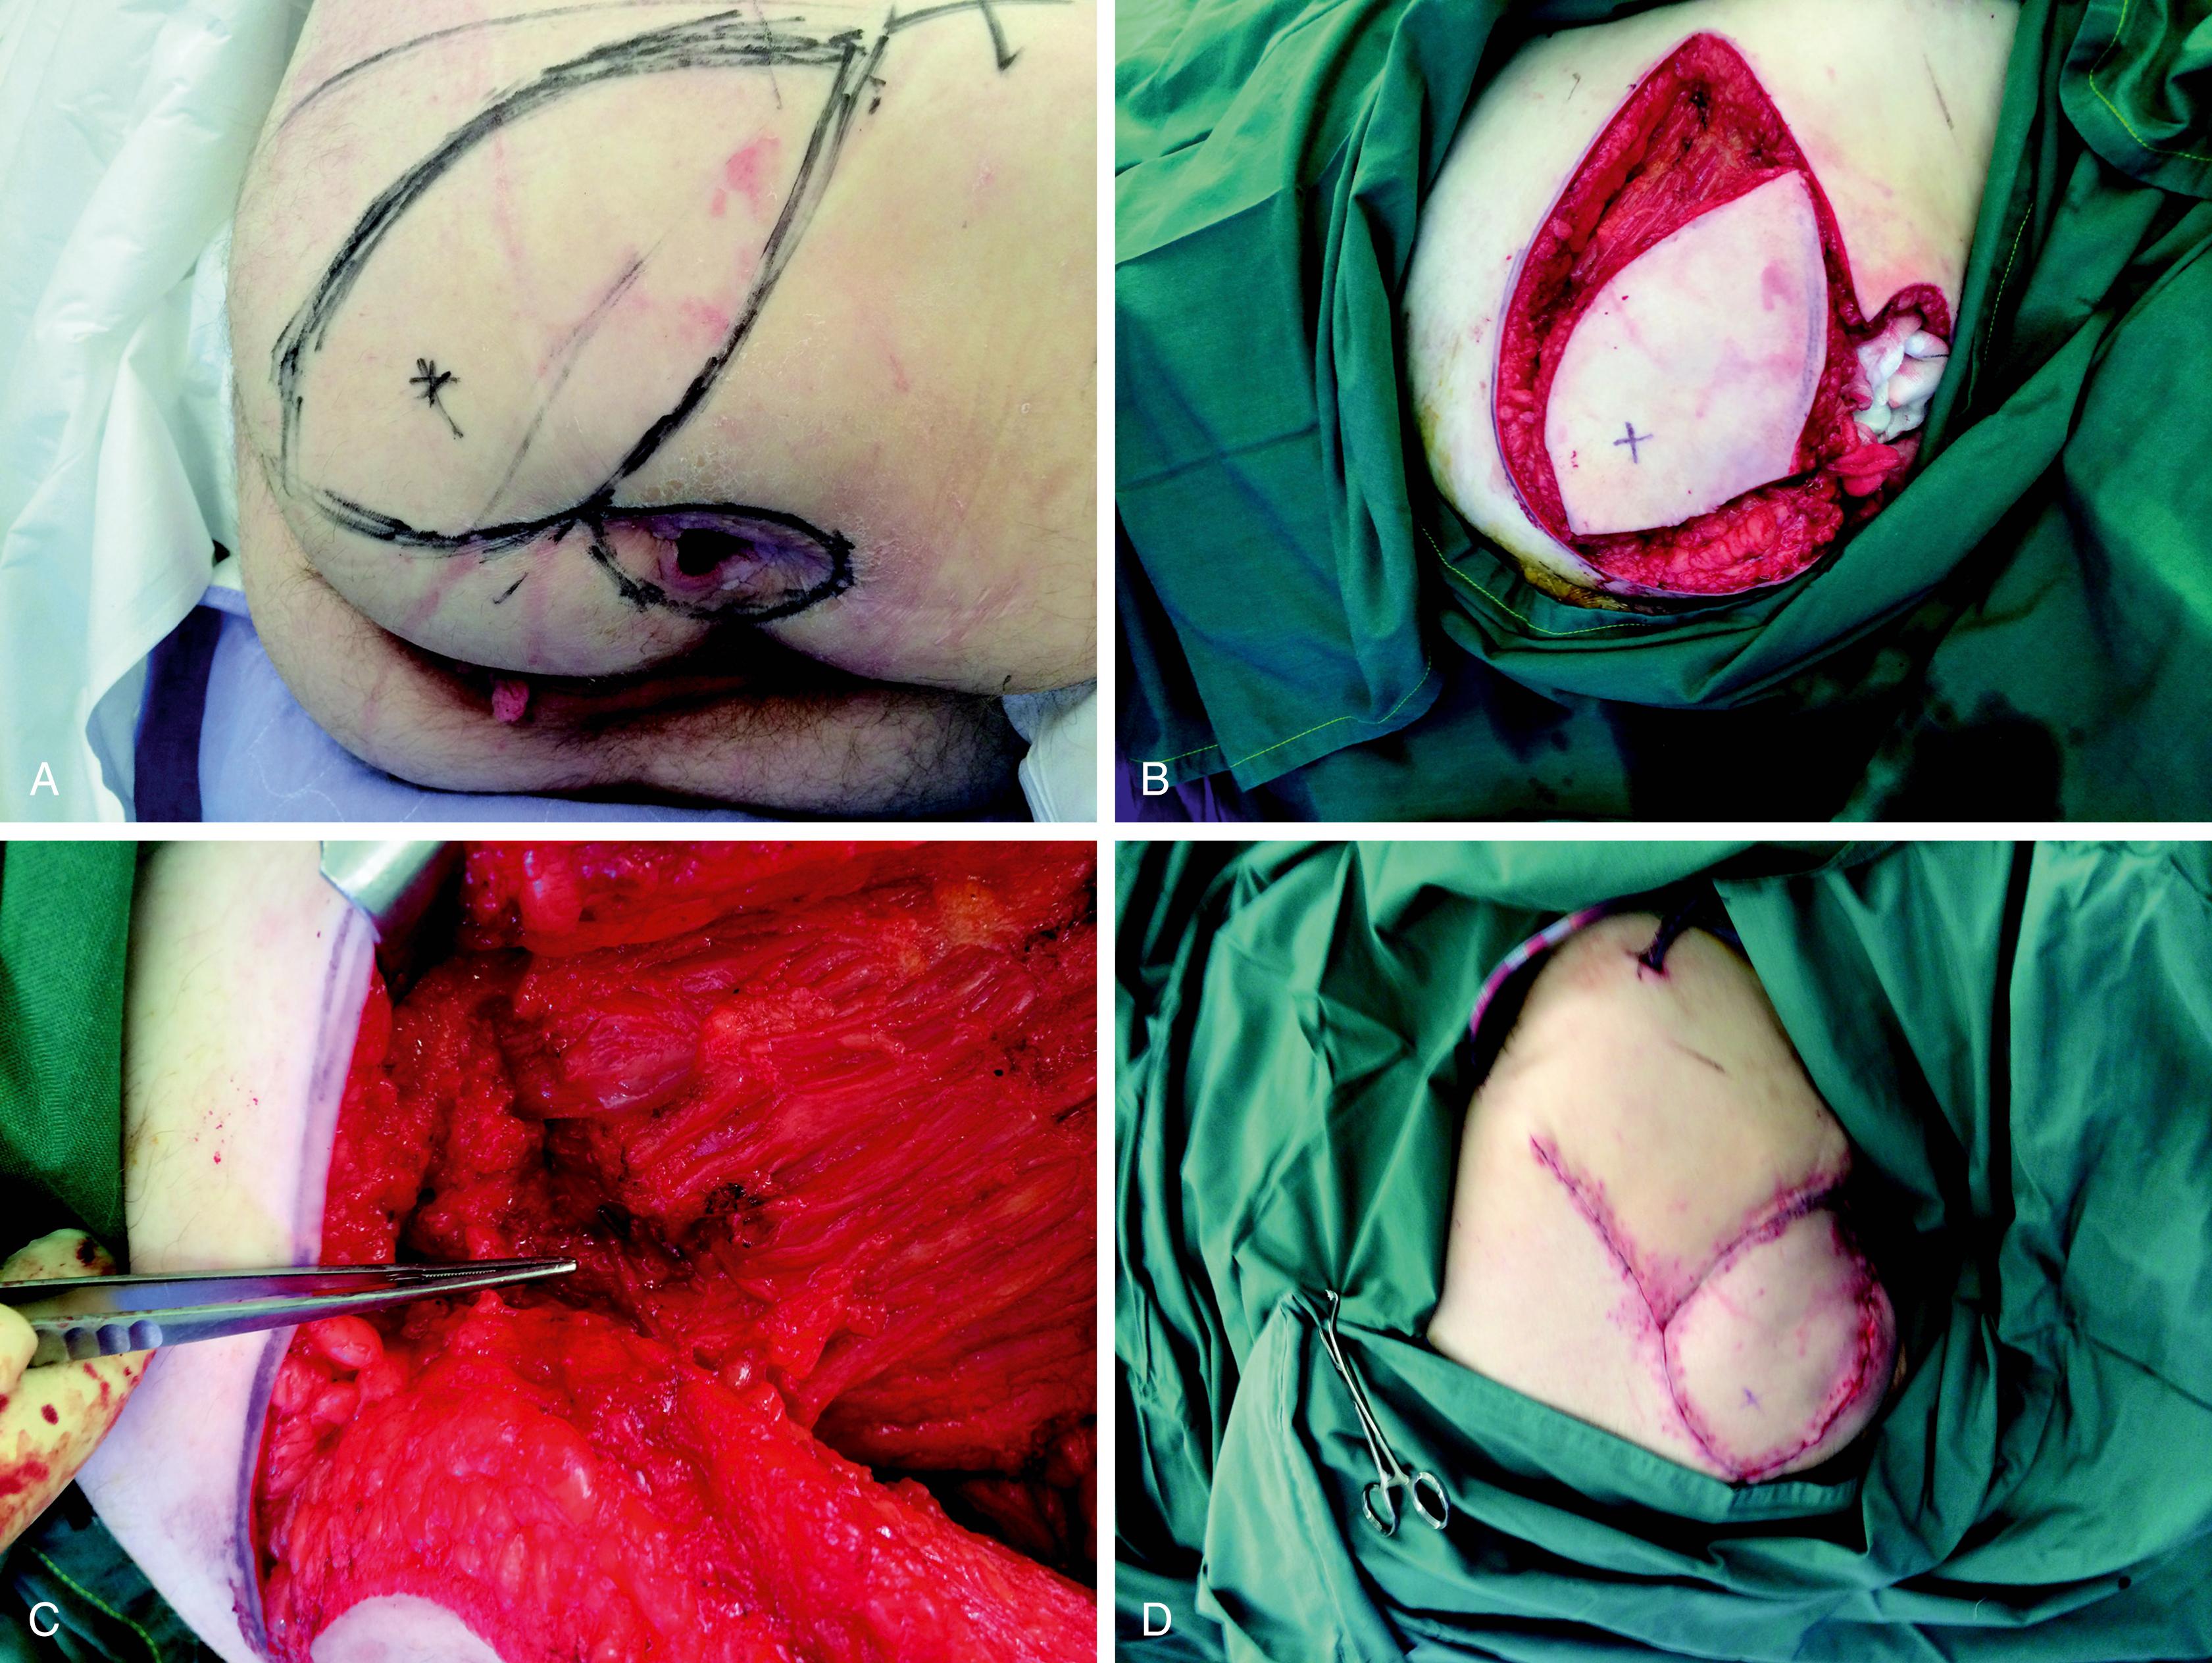 Fig. 41.11, Superior gluteal artery flap, islanded transposition flap. (A) Reverse flap design around the perforator. (B) Islanded flap. (C) Perforator isolation and dissection through the muscle towards the pelvis. (D) Transposition, inset, and closure of donor site.